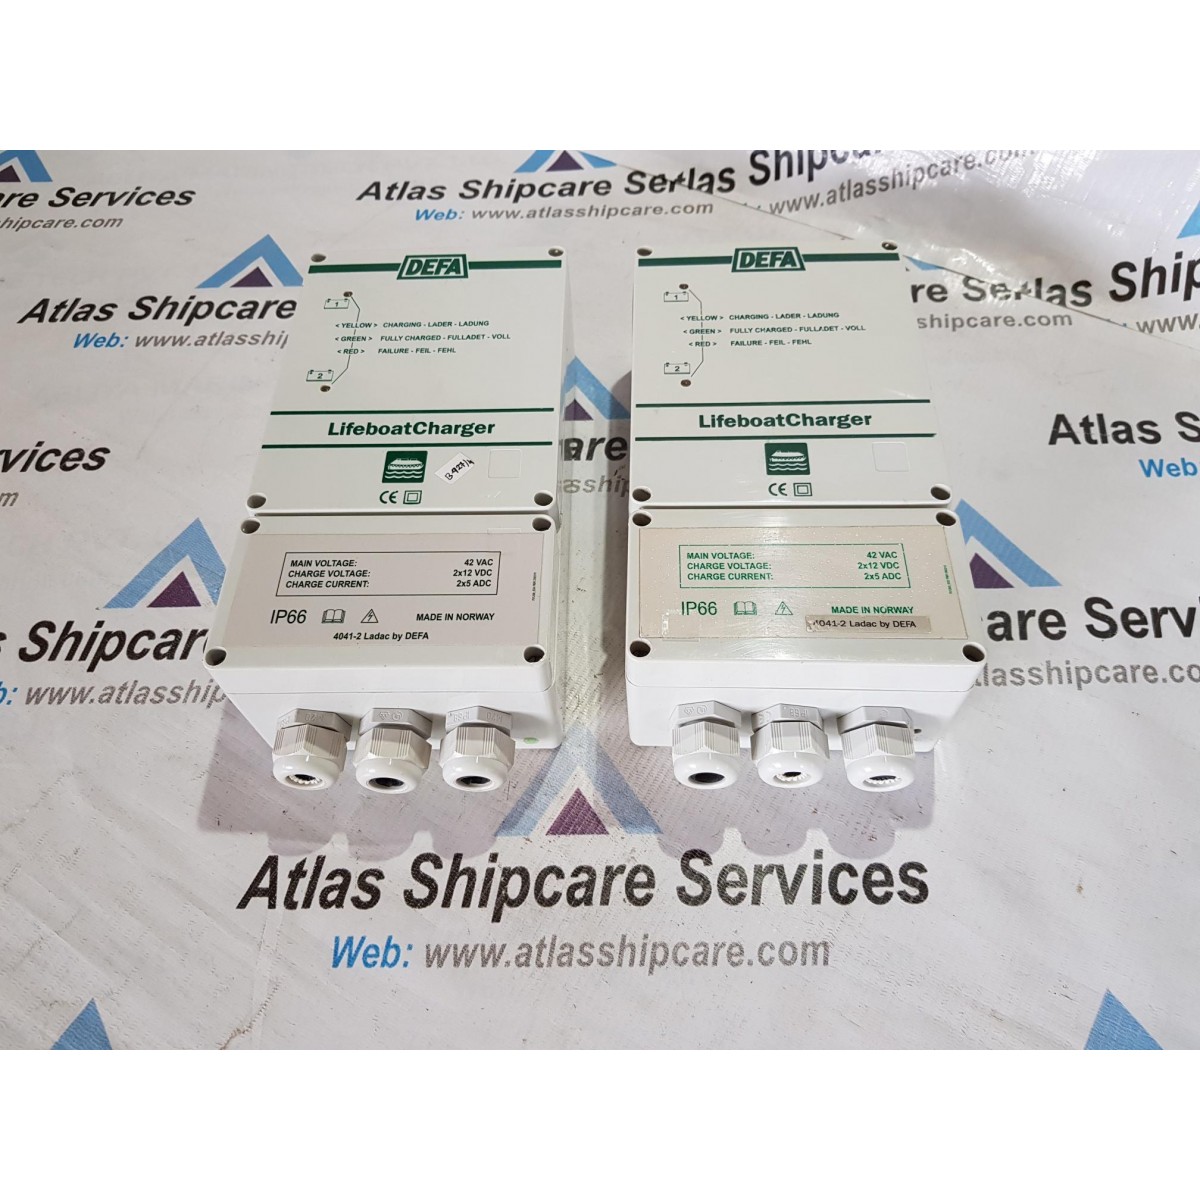 DEFA LIFEBOAT CHARGER 2X5A 42 VOLTS P/N 700110| Atlas Shipcare Services